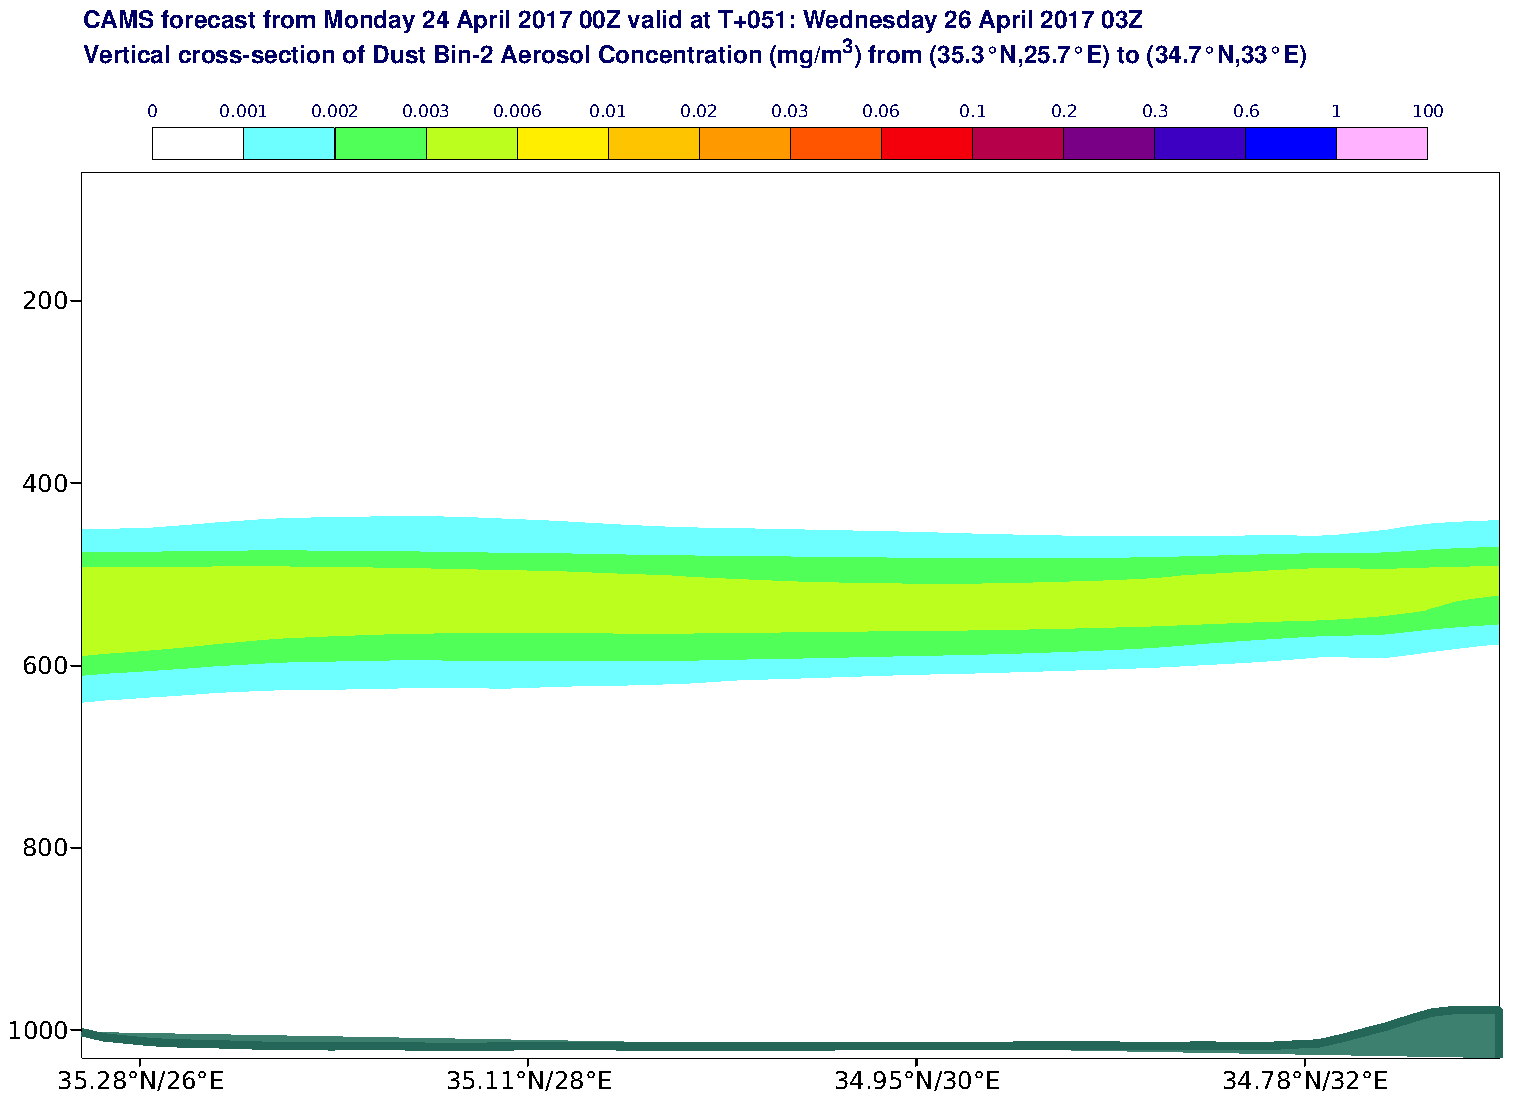 Vertical cross-section of Dust Bin-2 Aerosol Concentration (mg/m3) valid at T51 - 2017-04-26 03:00